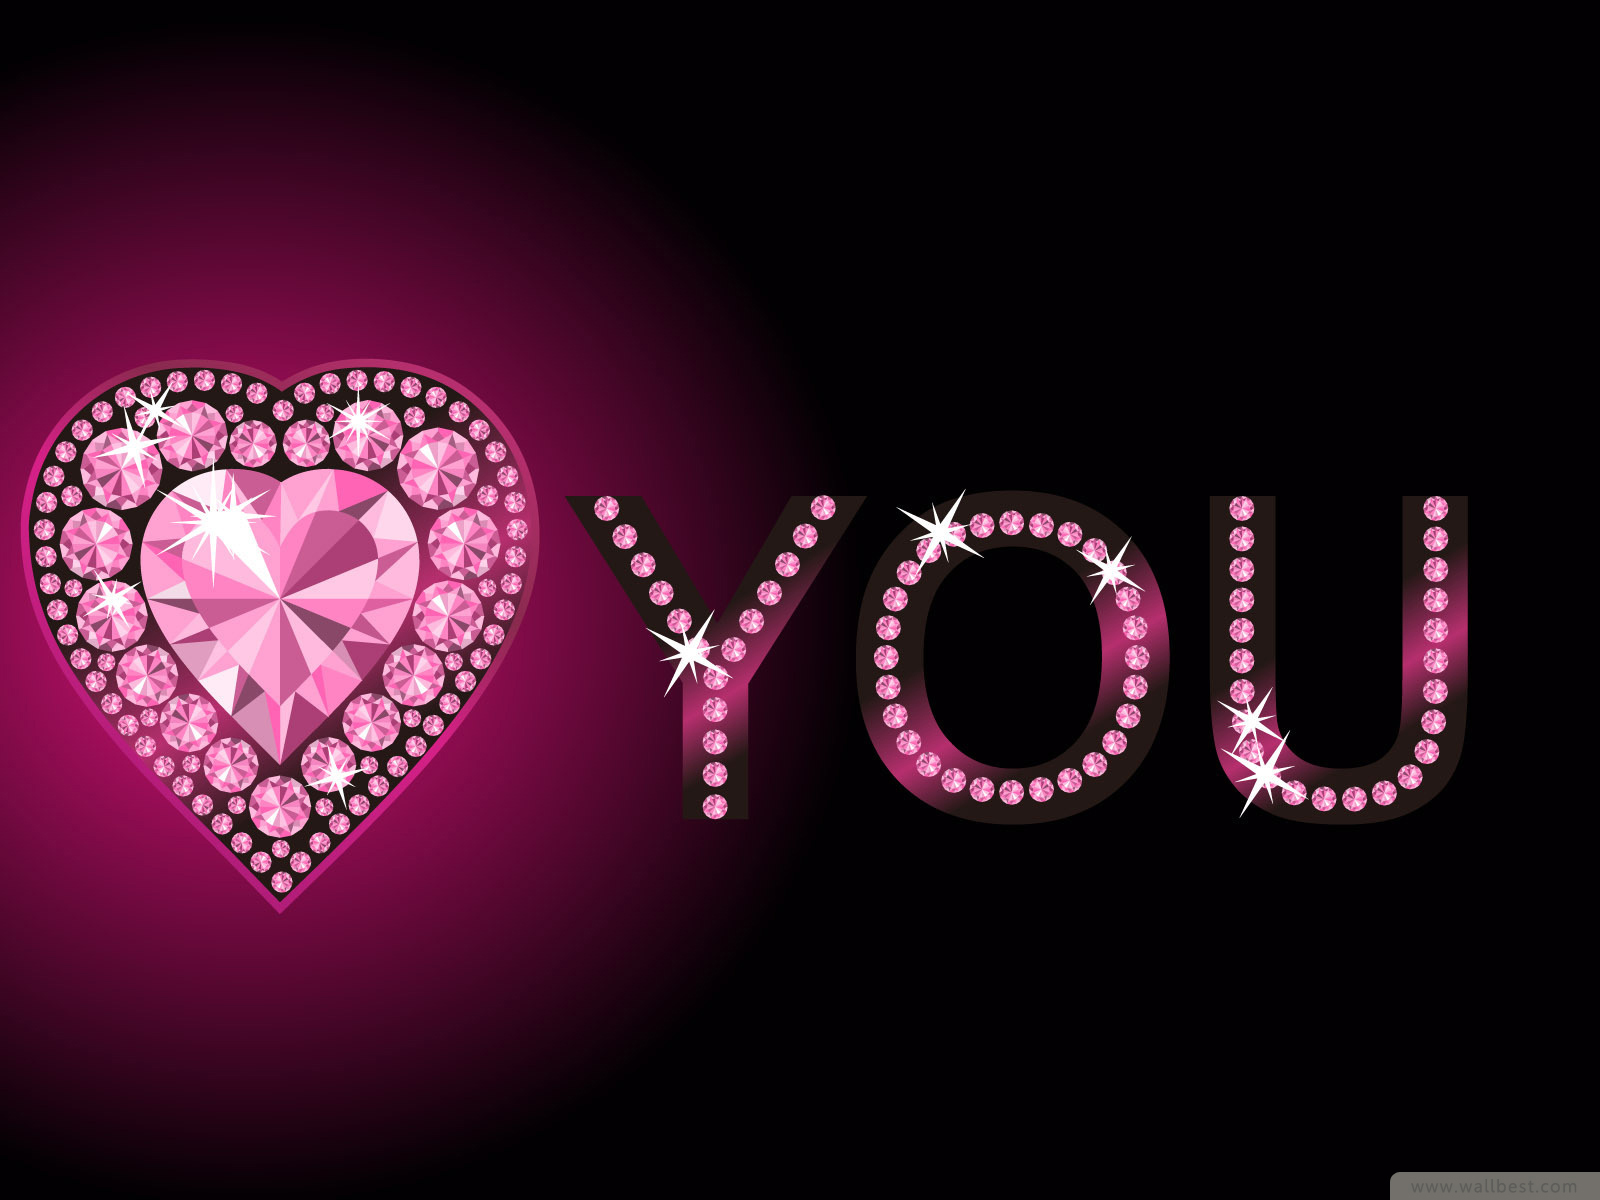 Love You (ILU) Pictures, Photos and HD wallpapers 2013 | I Love You ...